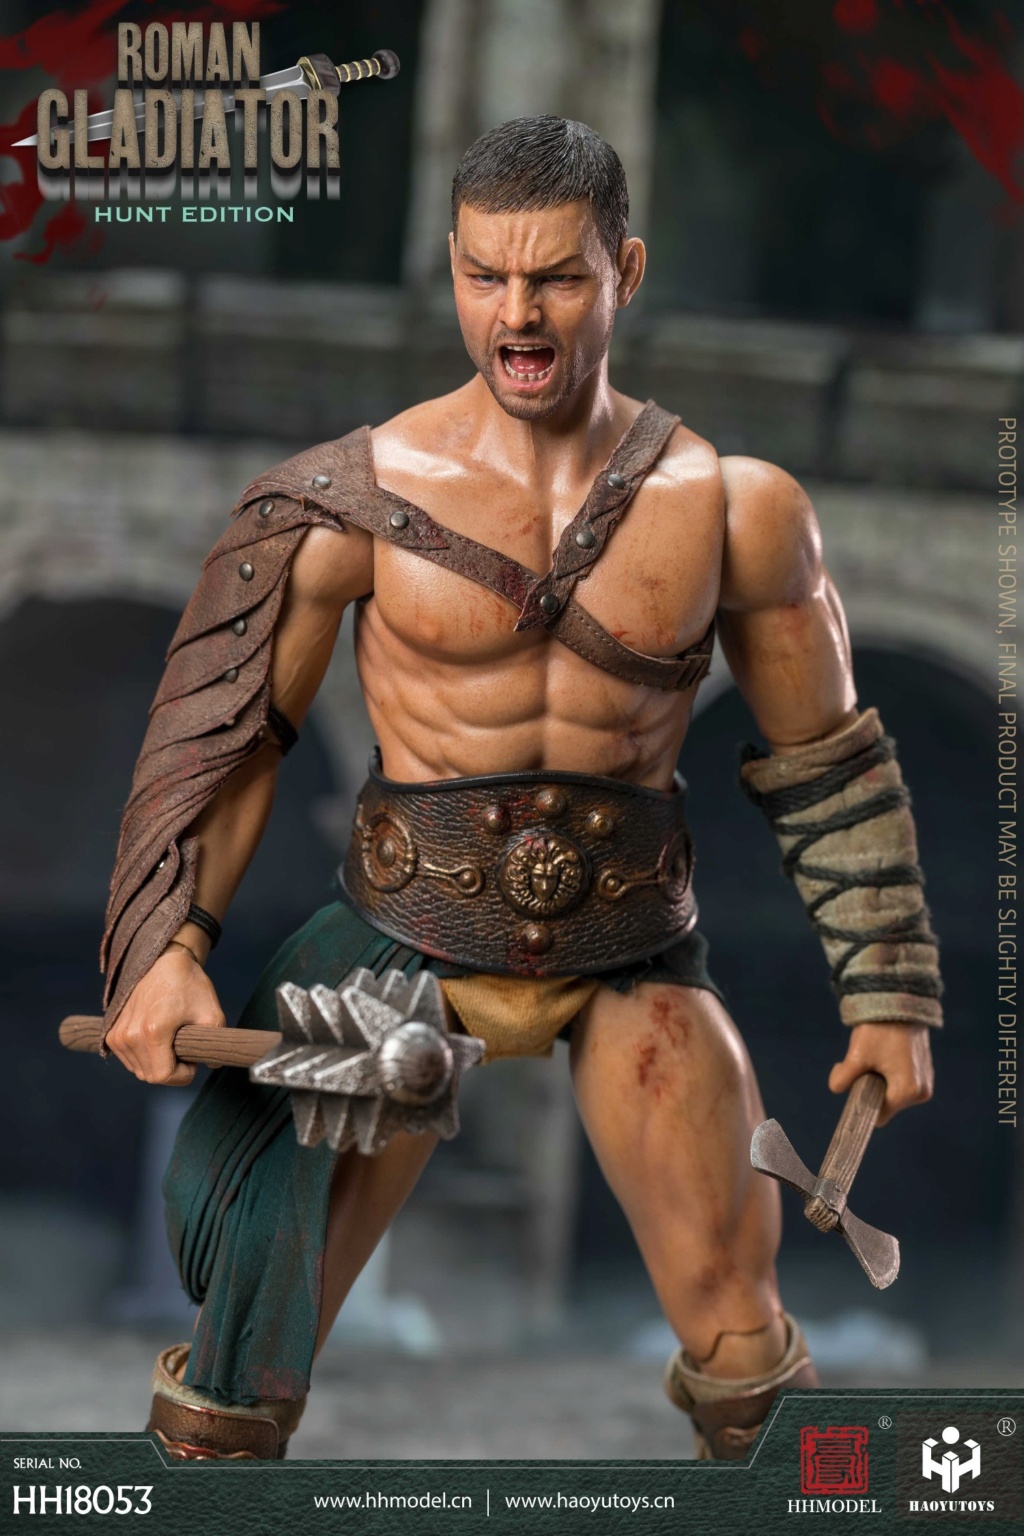 Historical - NEW PRODUCT: HHMODEL & HAOYUTOYS: 1/6 Imperial Legion Series - Roman Gladiator [God of War Edition] HH18052 & [Hunt Edition] HH18053 20341810